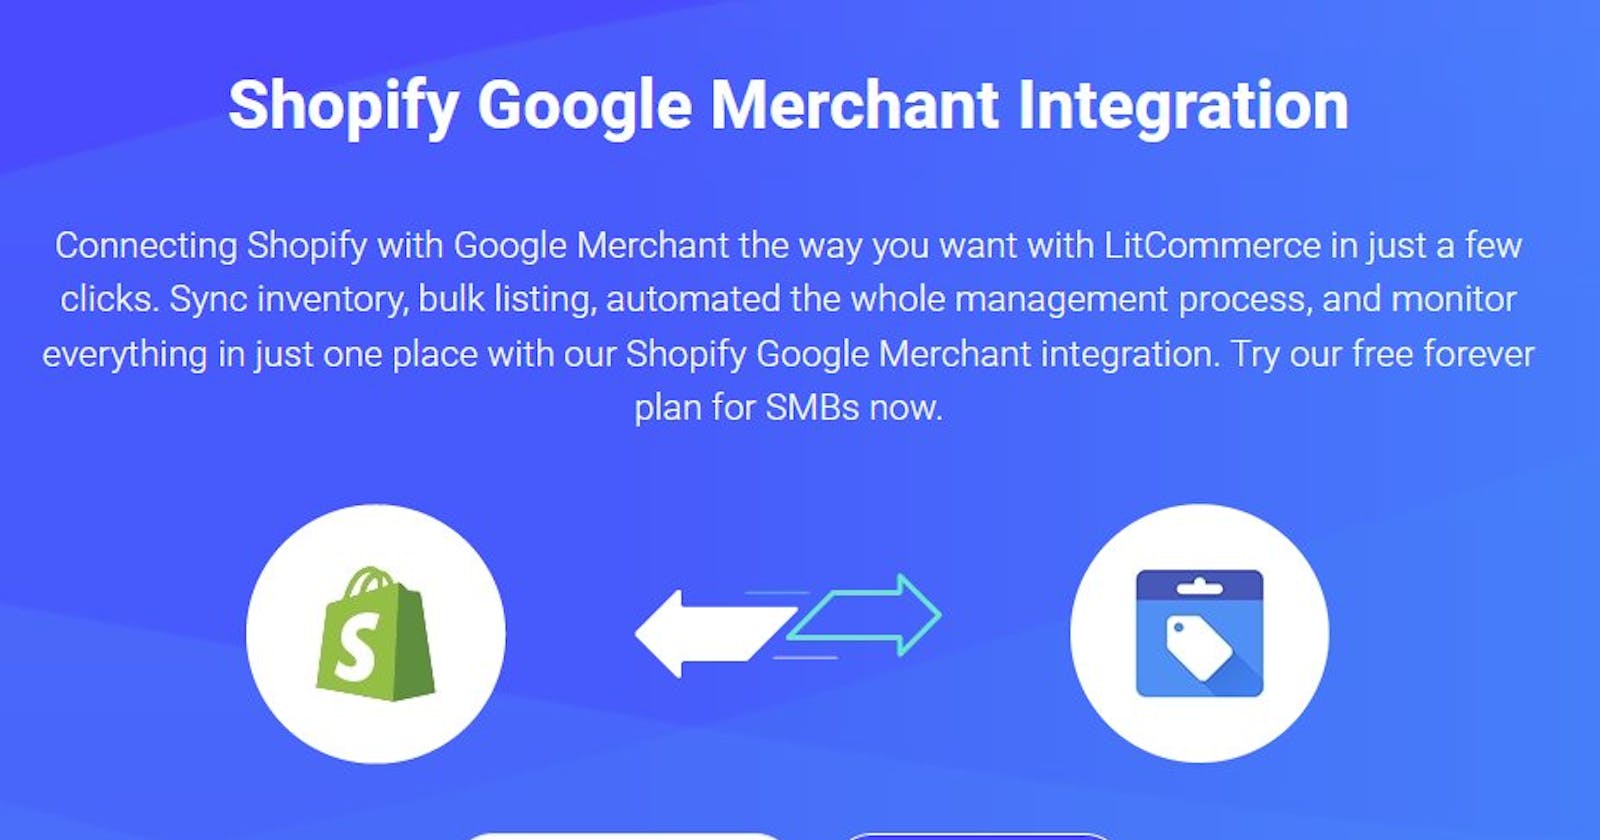 Can't Connect Shopify with Google Merchant?